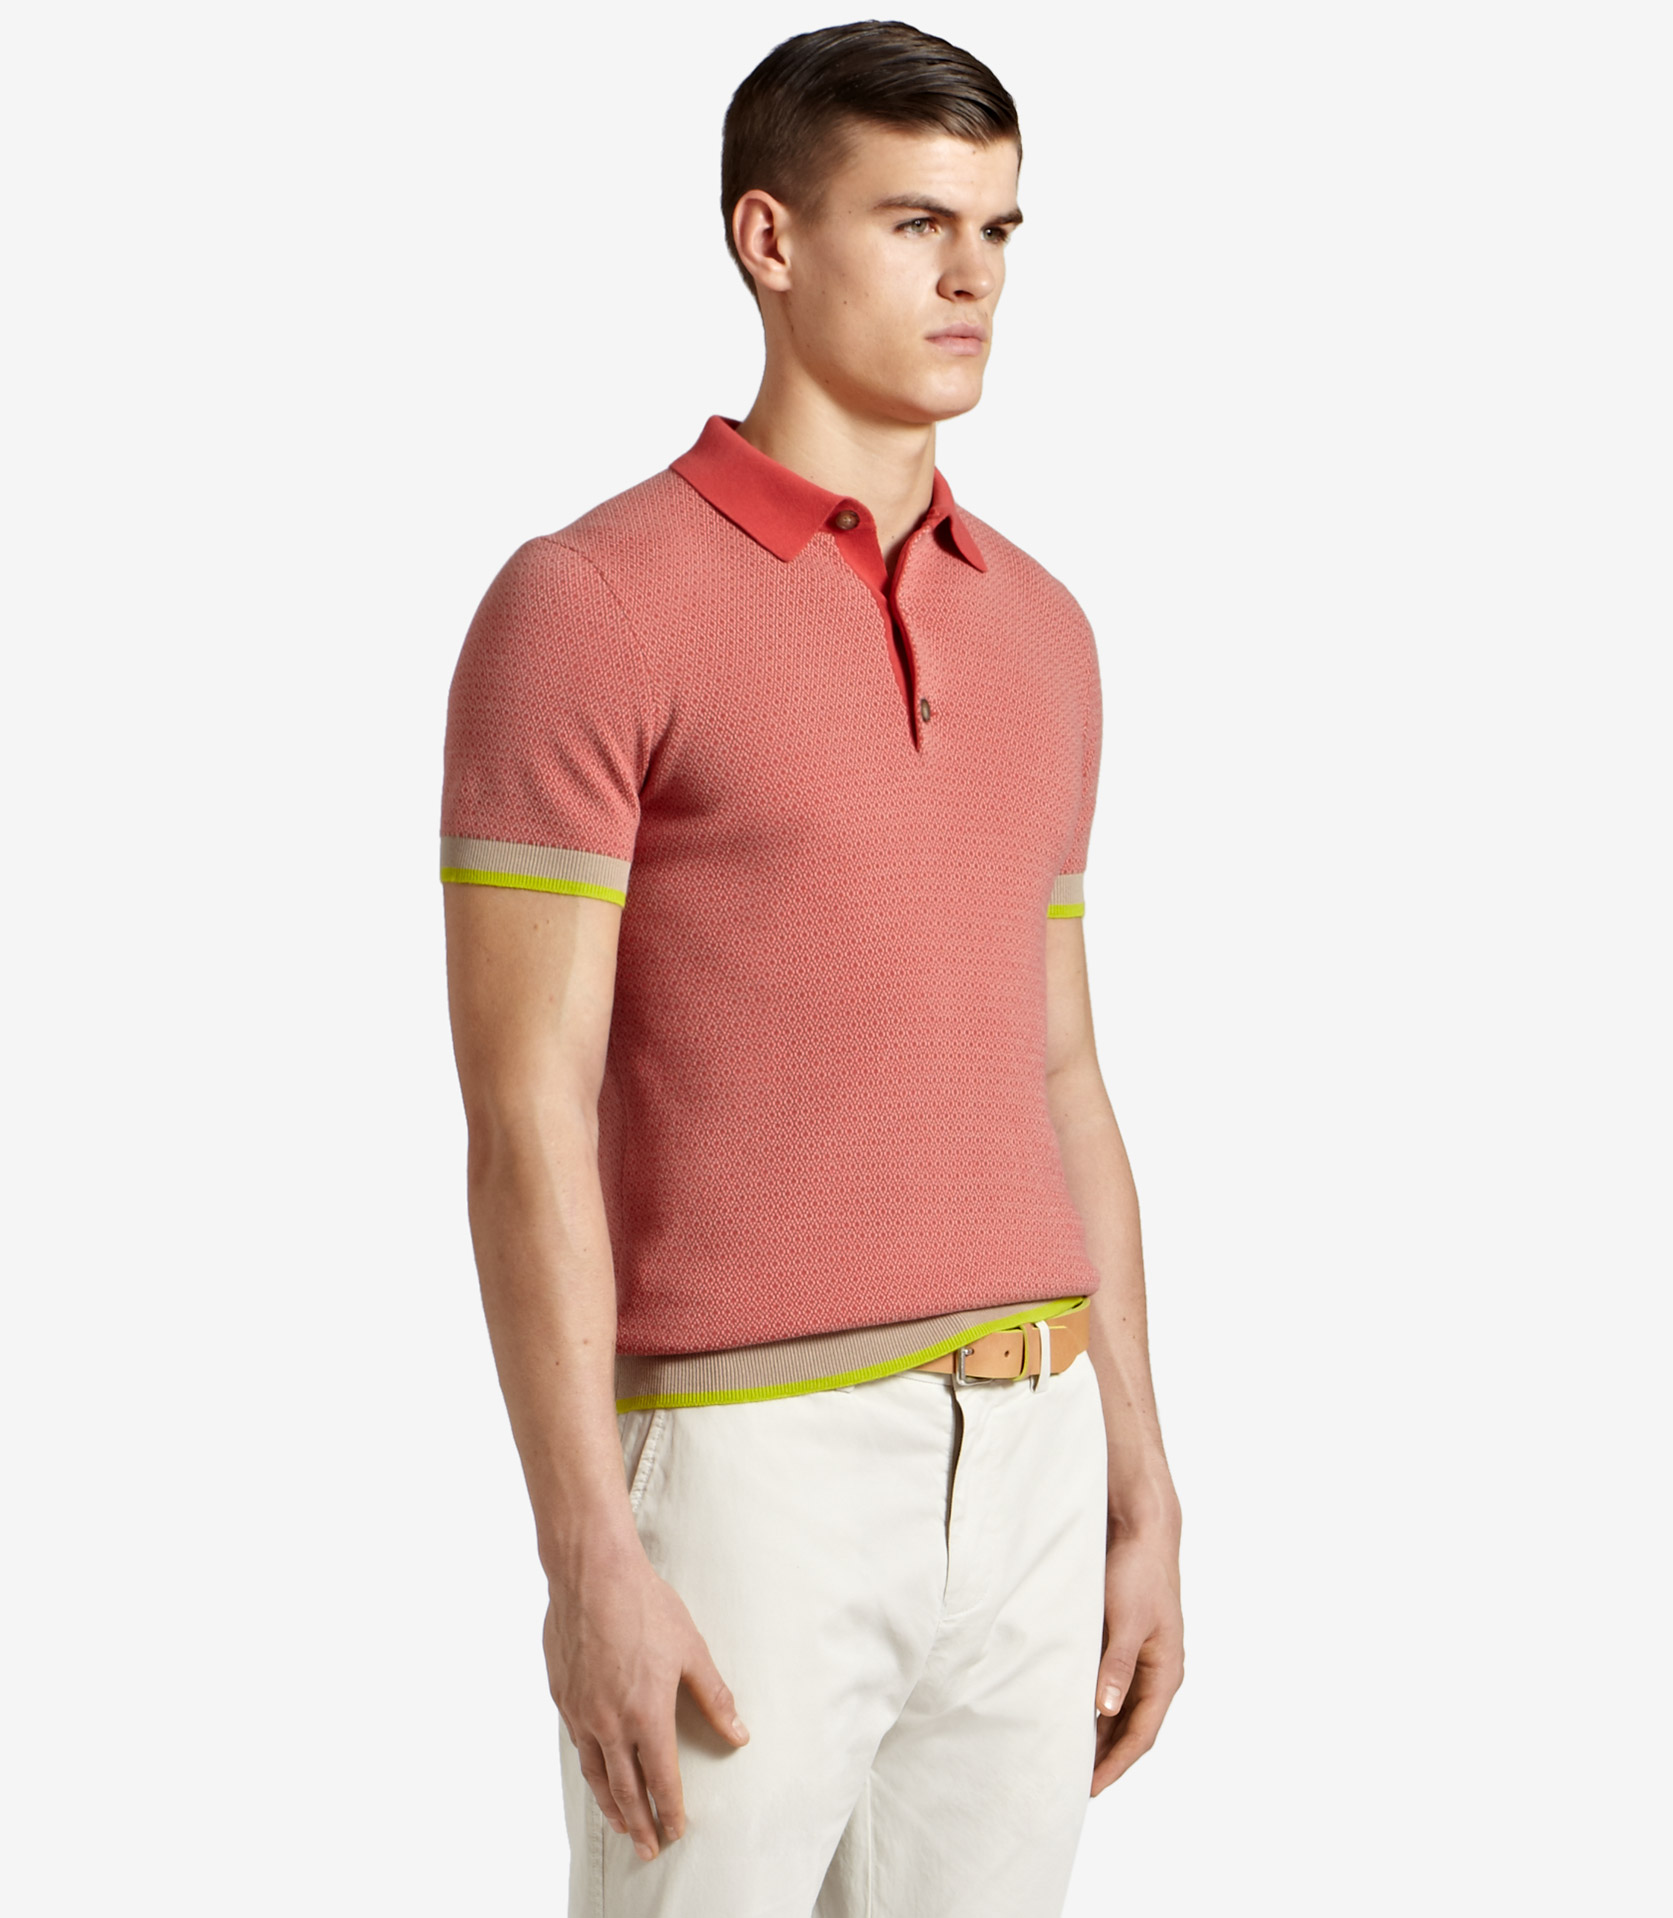 Lyst - Reiss Wiley Short Sleeve Polo with Contrast Tipping in Red for Men